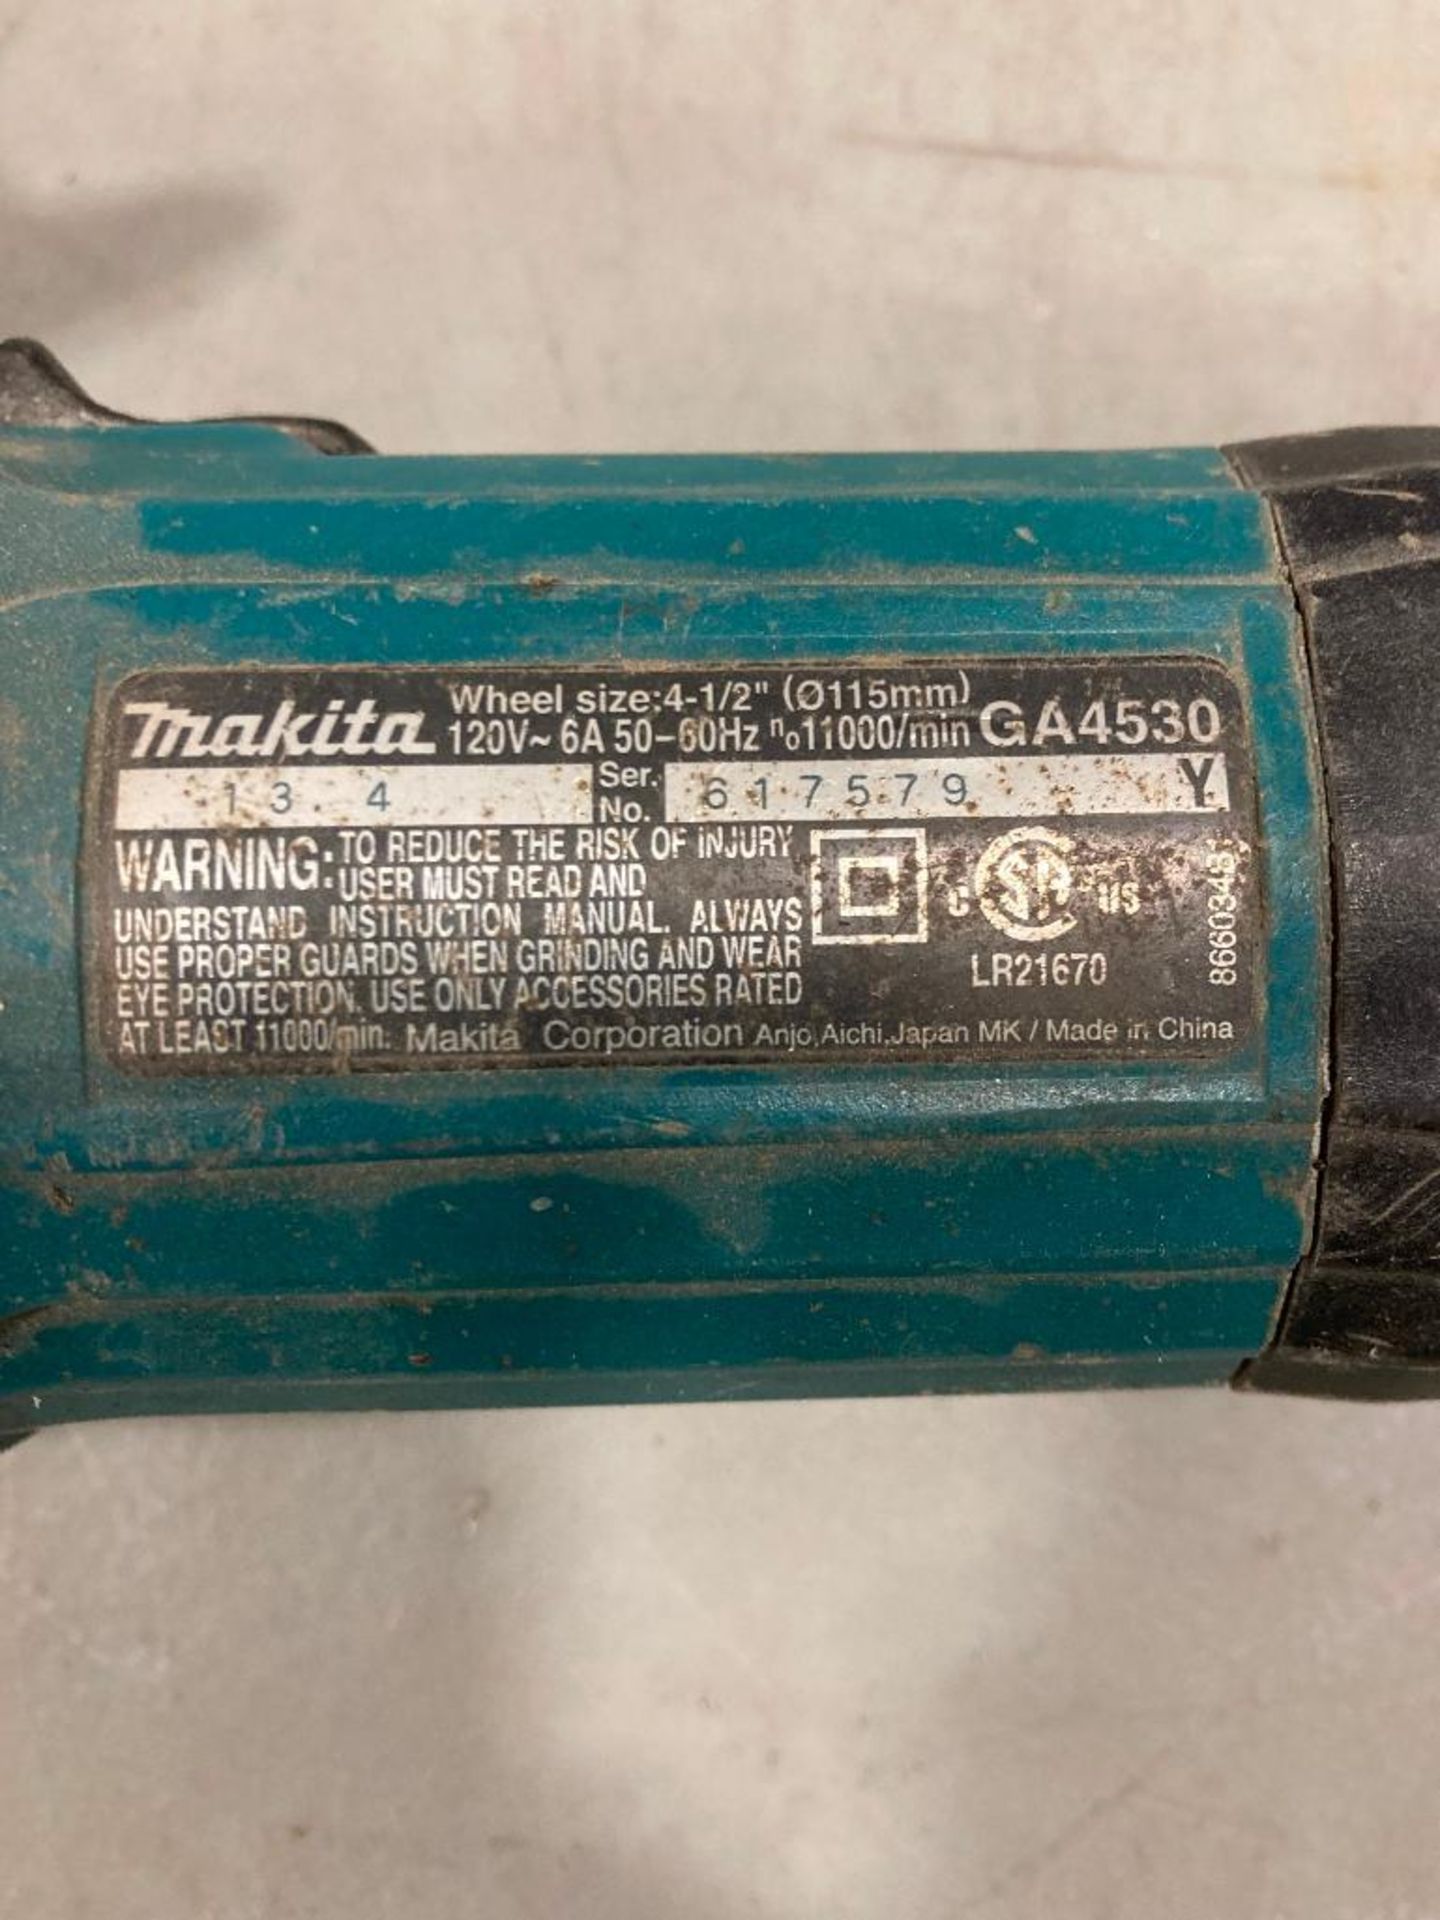 Lot of (3) Asst. Makita Angle Grinders - Image 9 of 9